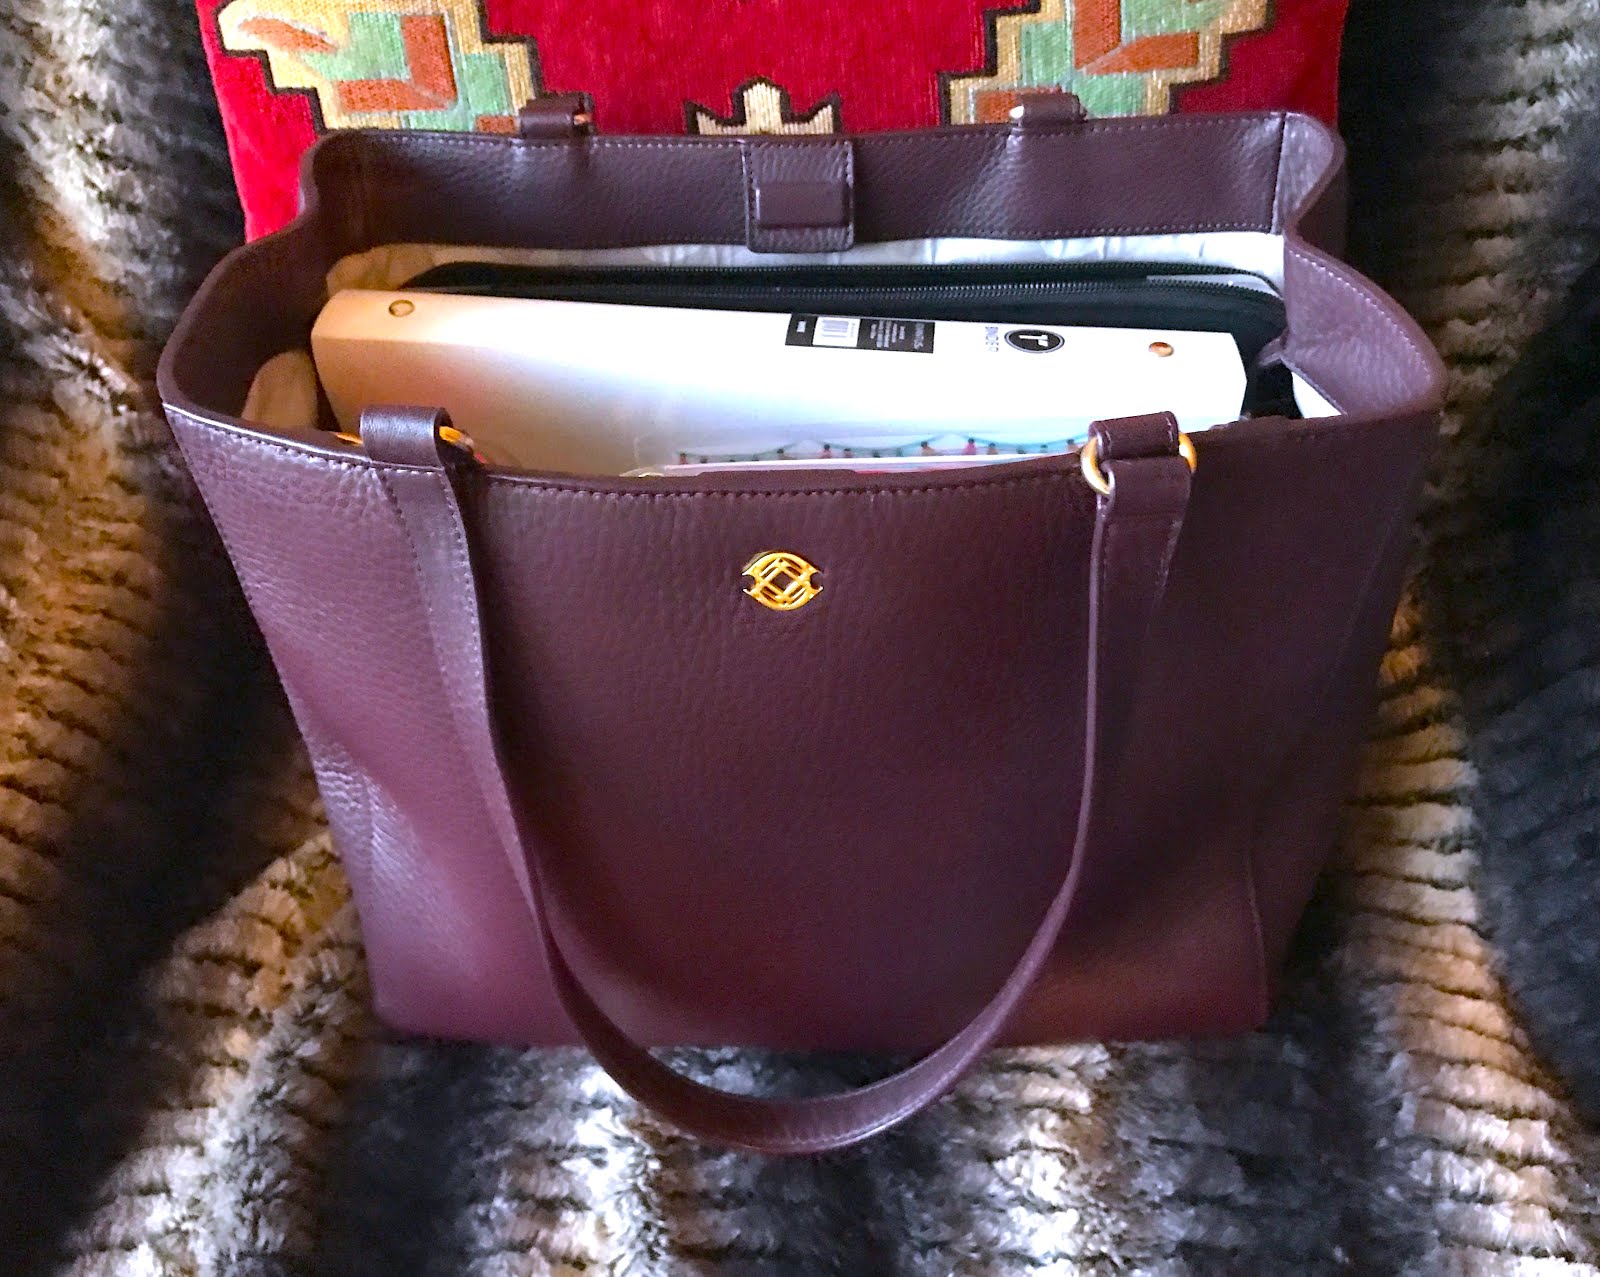 A Look Inside My Dagne Dover Allyn Tote, And What I Pack For Long Days